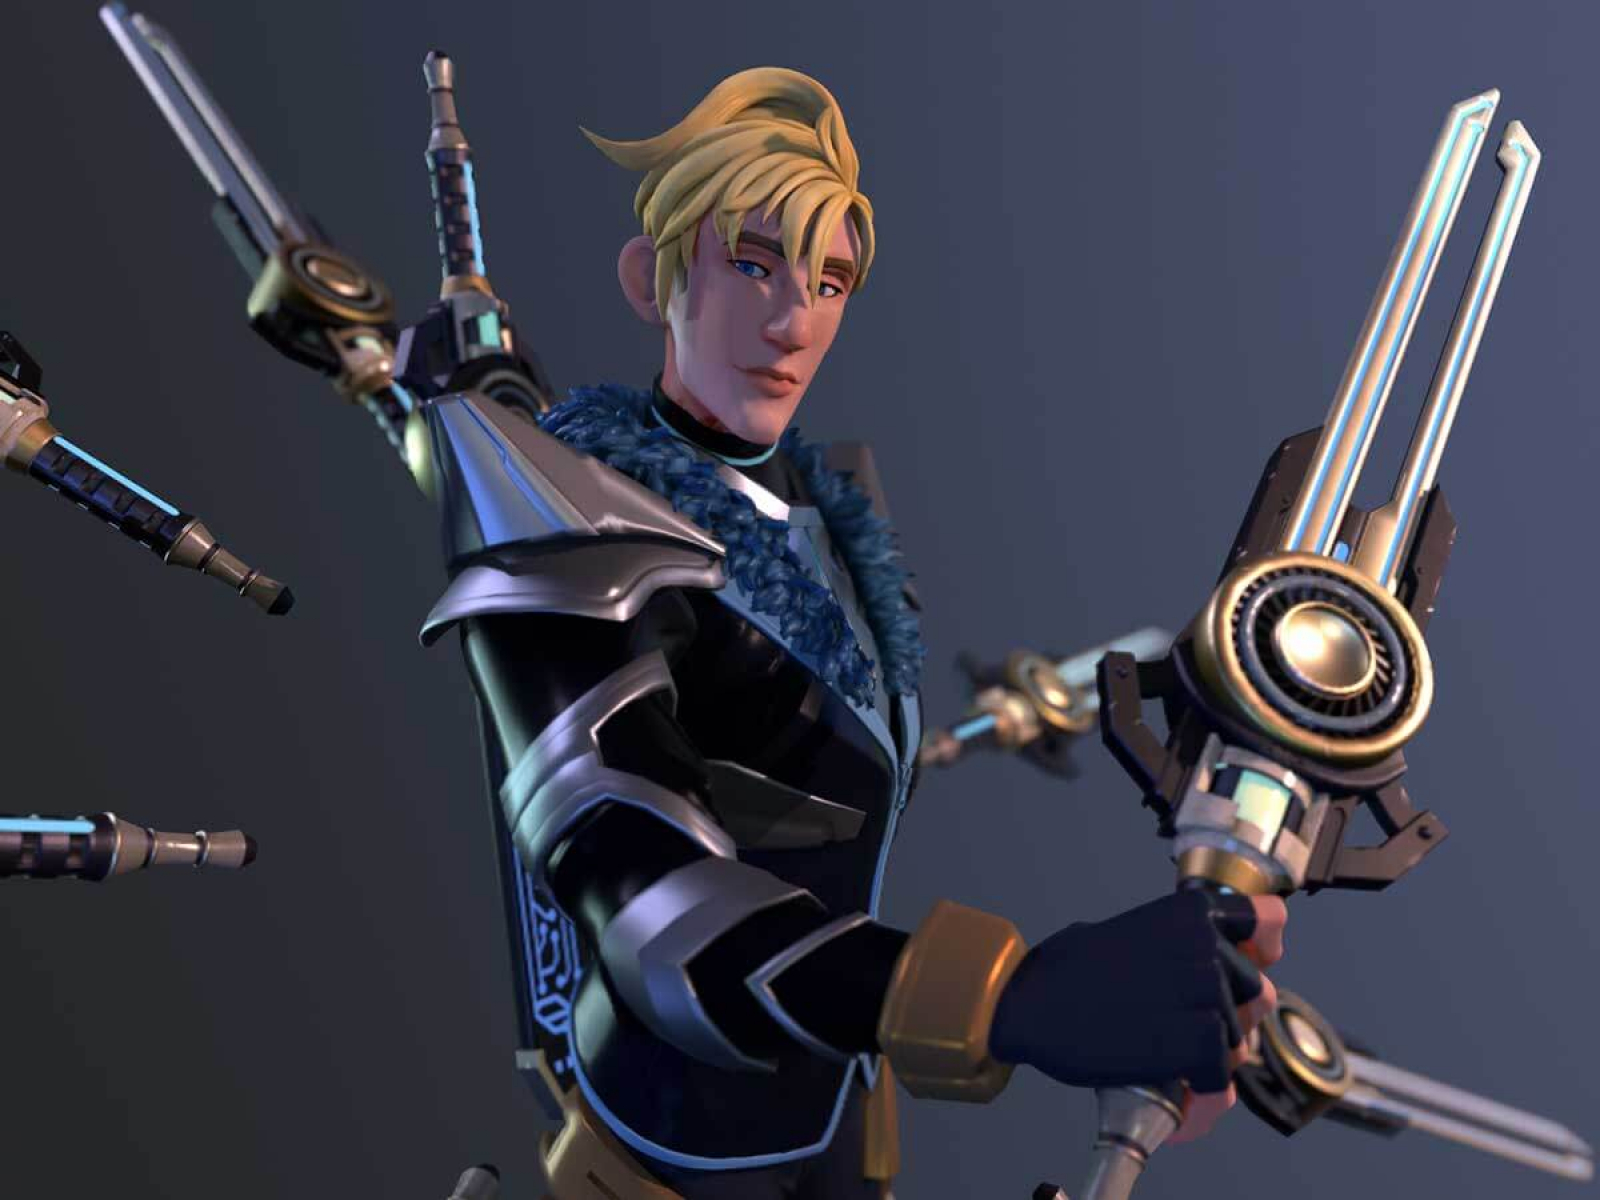 A blonde character wielding several mechanical swords.